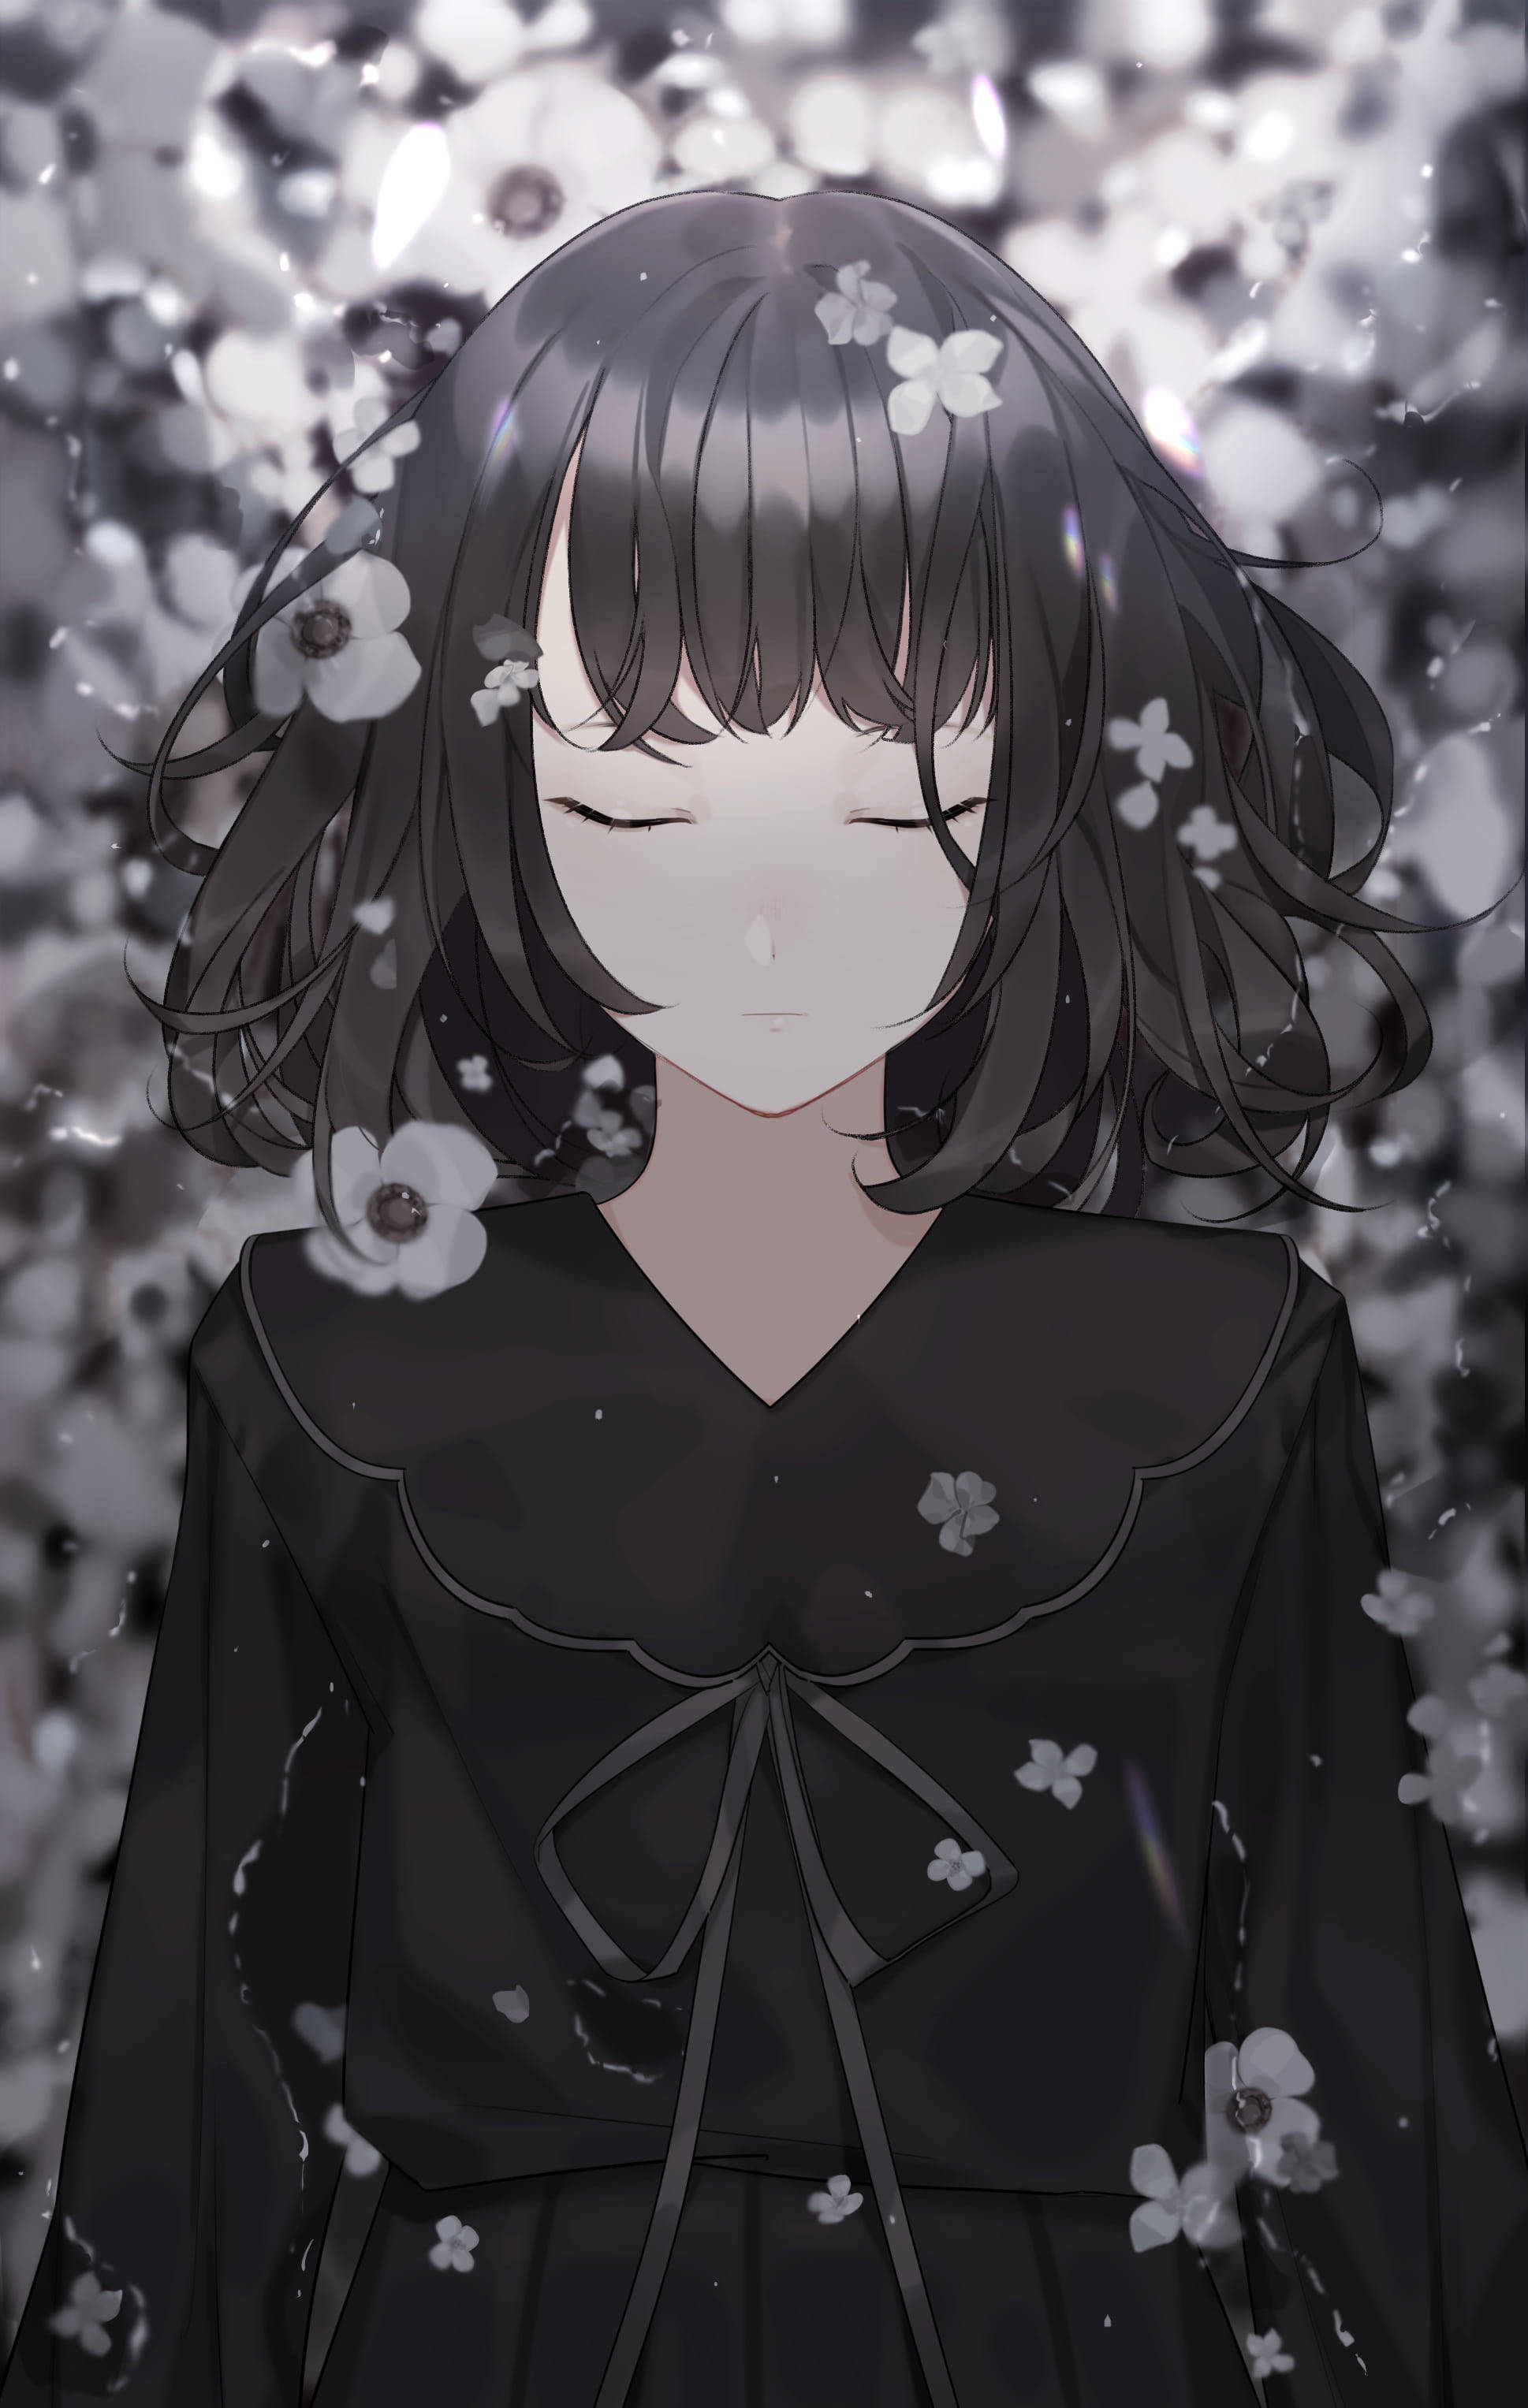 Sad Anime Girl Black And White With Flowers Wallpaper